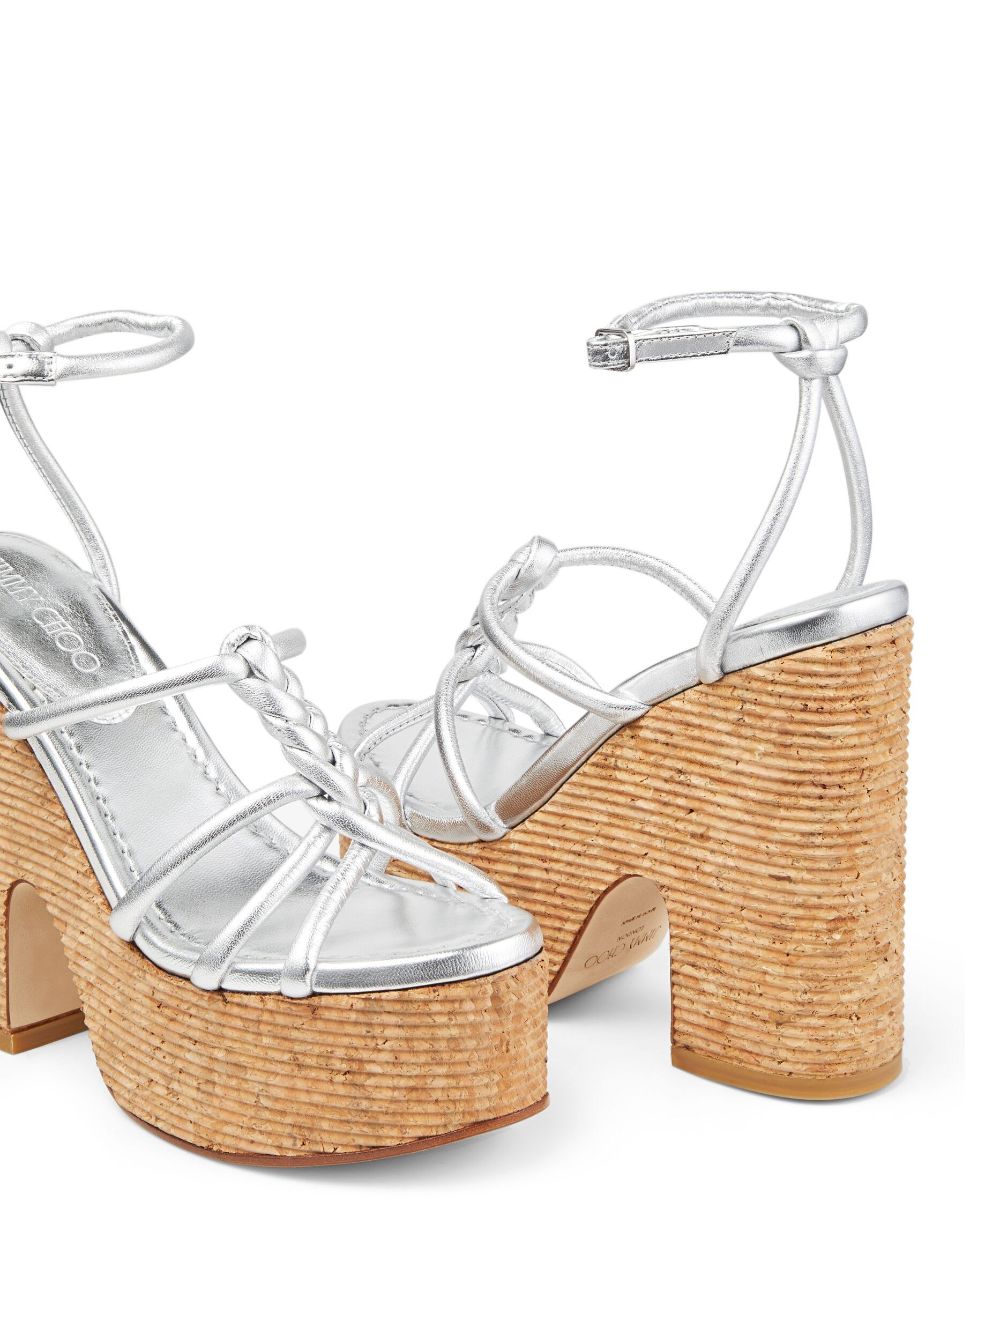 Shop Jimmy Choo Clare 130mm Metallic Leather Wedge Sandals In Silver